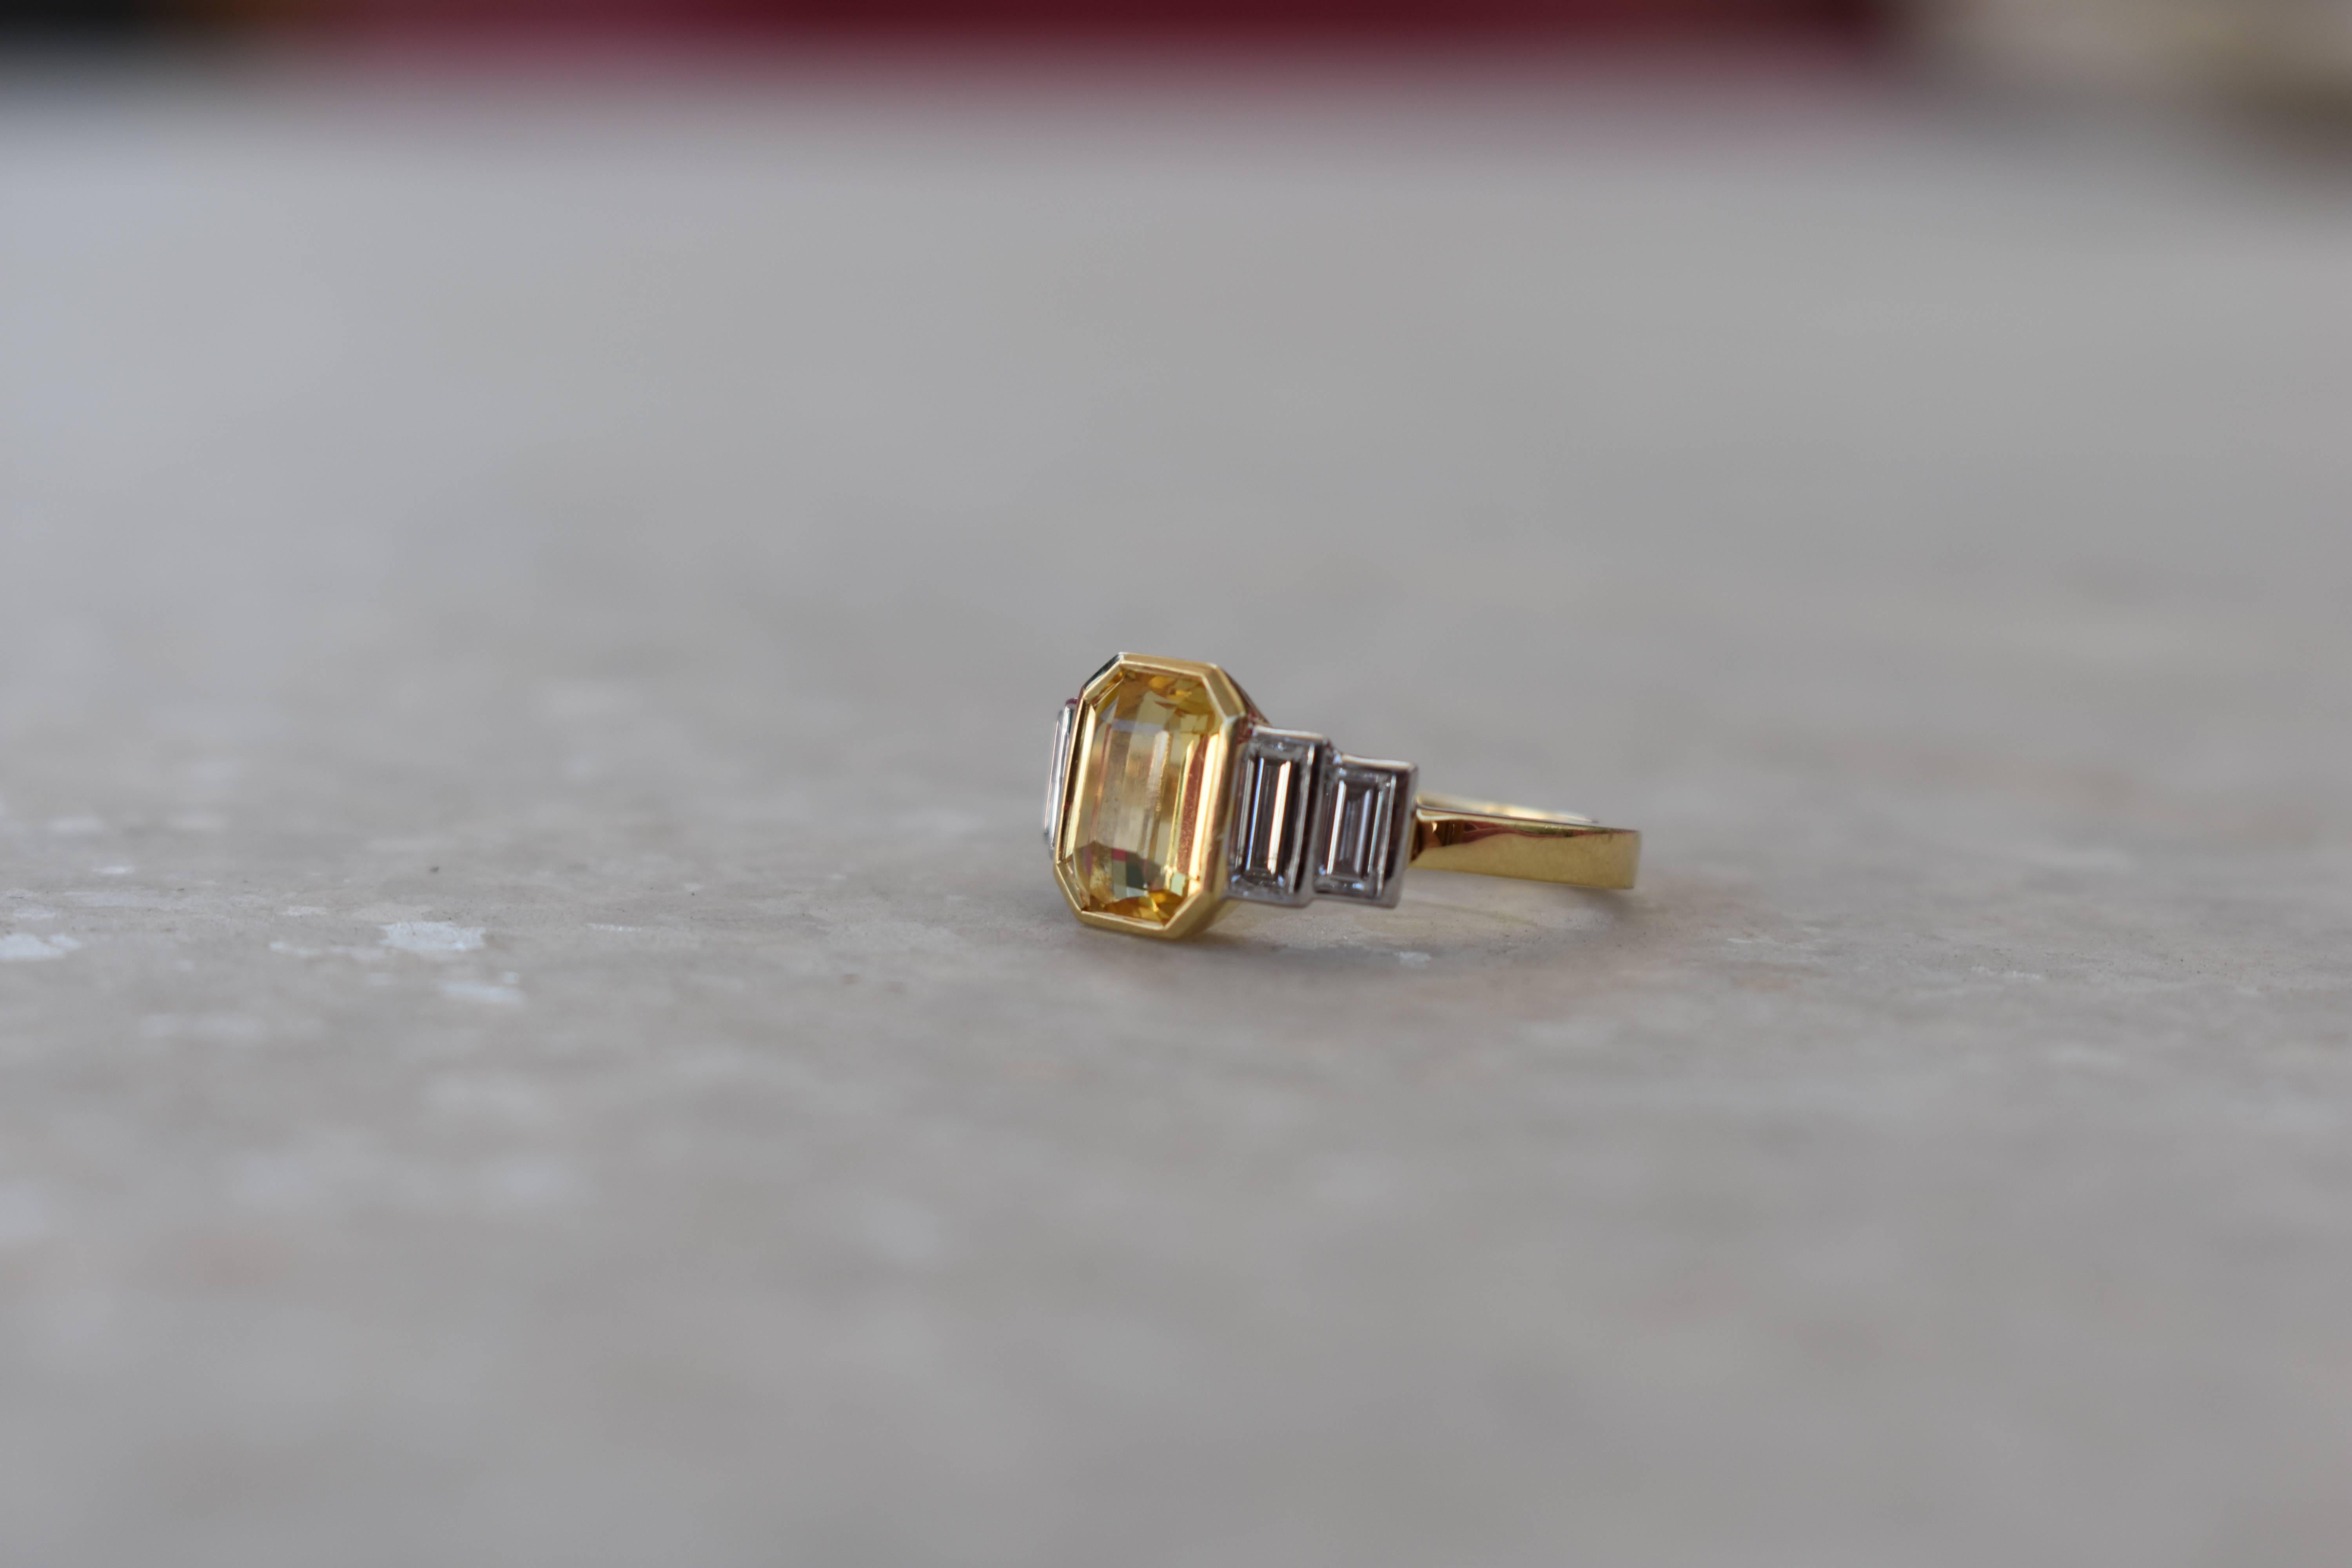 A sophisticated Sri Lankan yellow emerald cut sapphire and baguette diamond ring. 18 karat yellow and white gold surround the yellow, no heat sapphire, and tapered baguette diamonds. Perfect as a dress ring or engagement ring. Comfortable to wear as